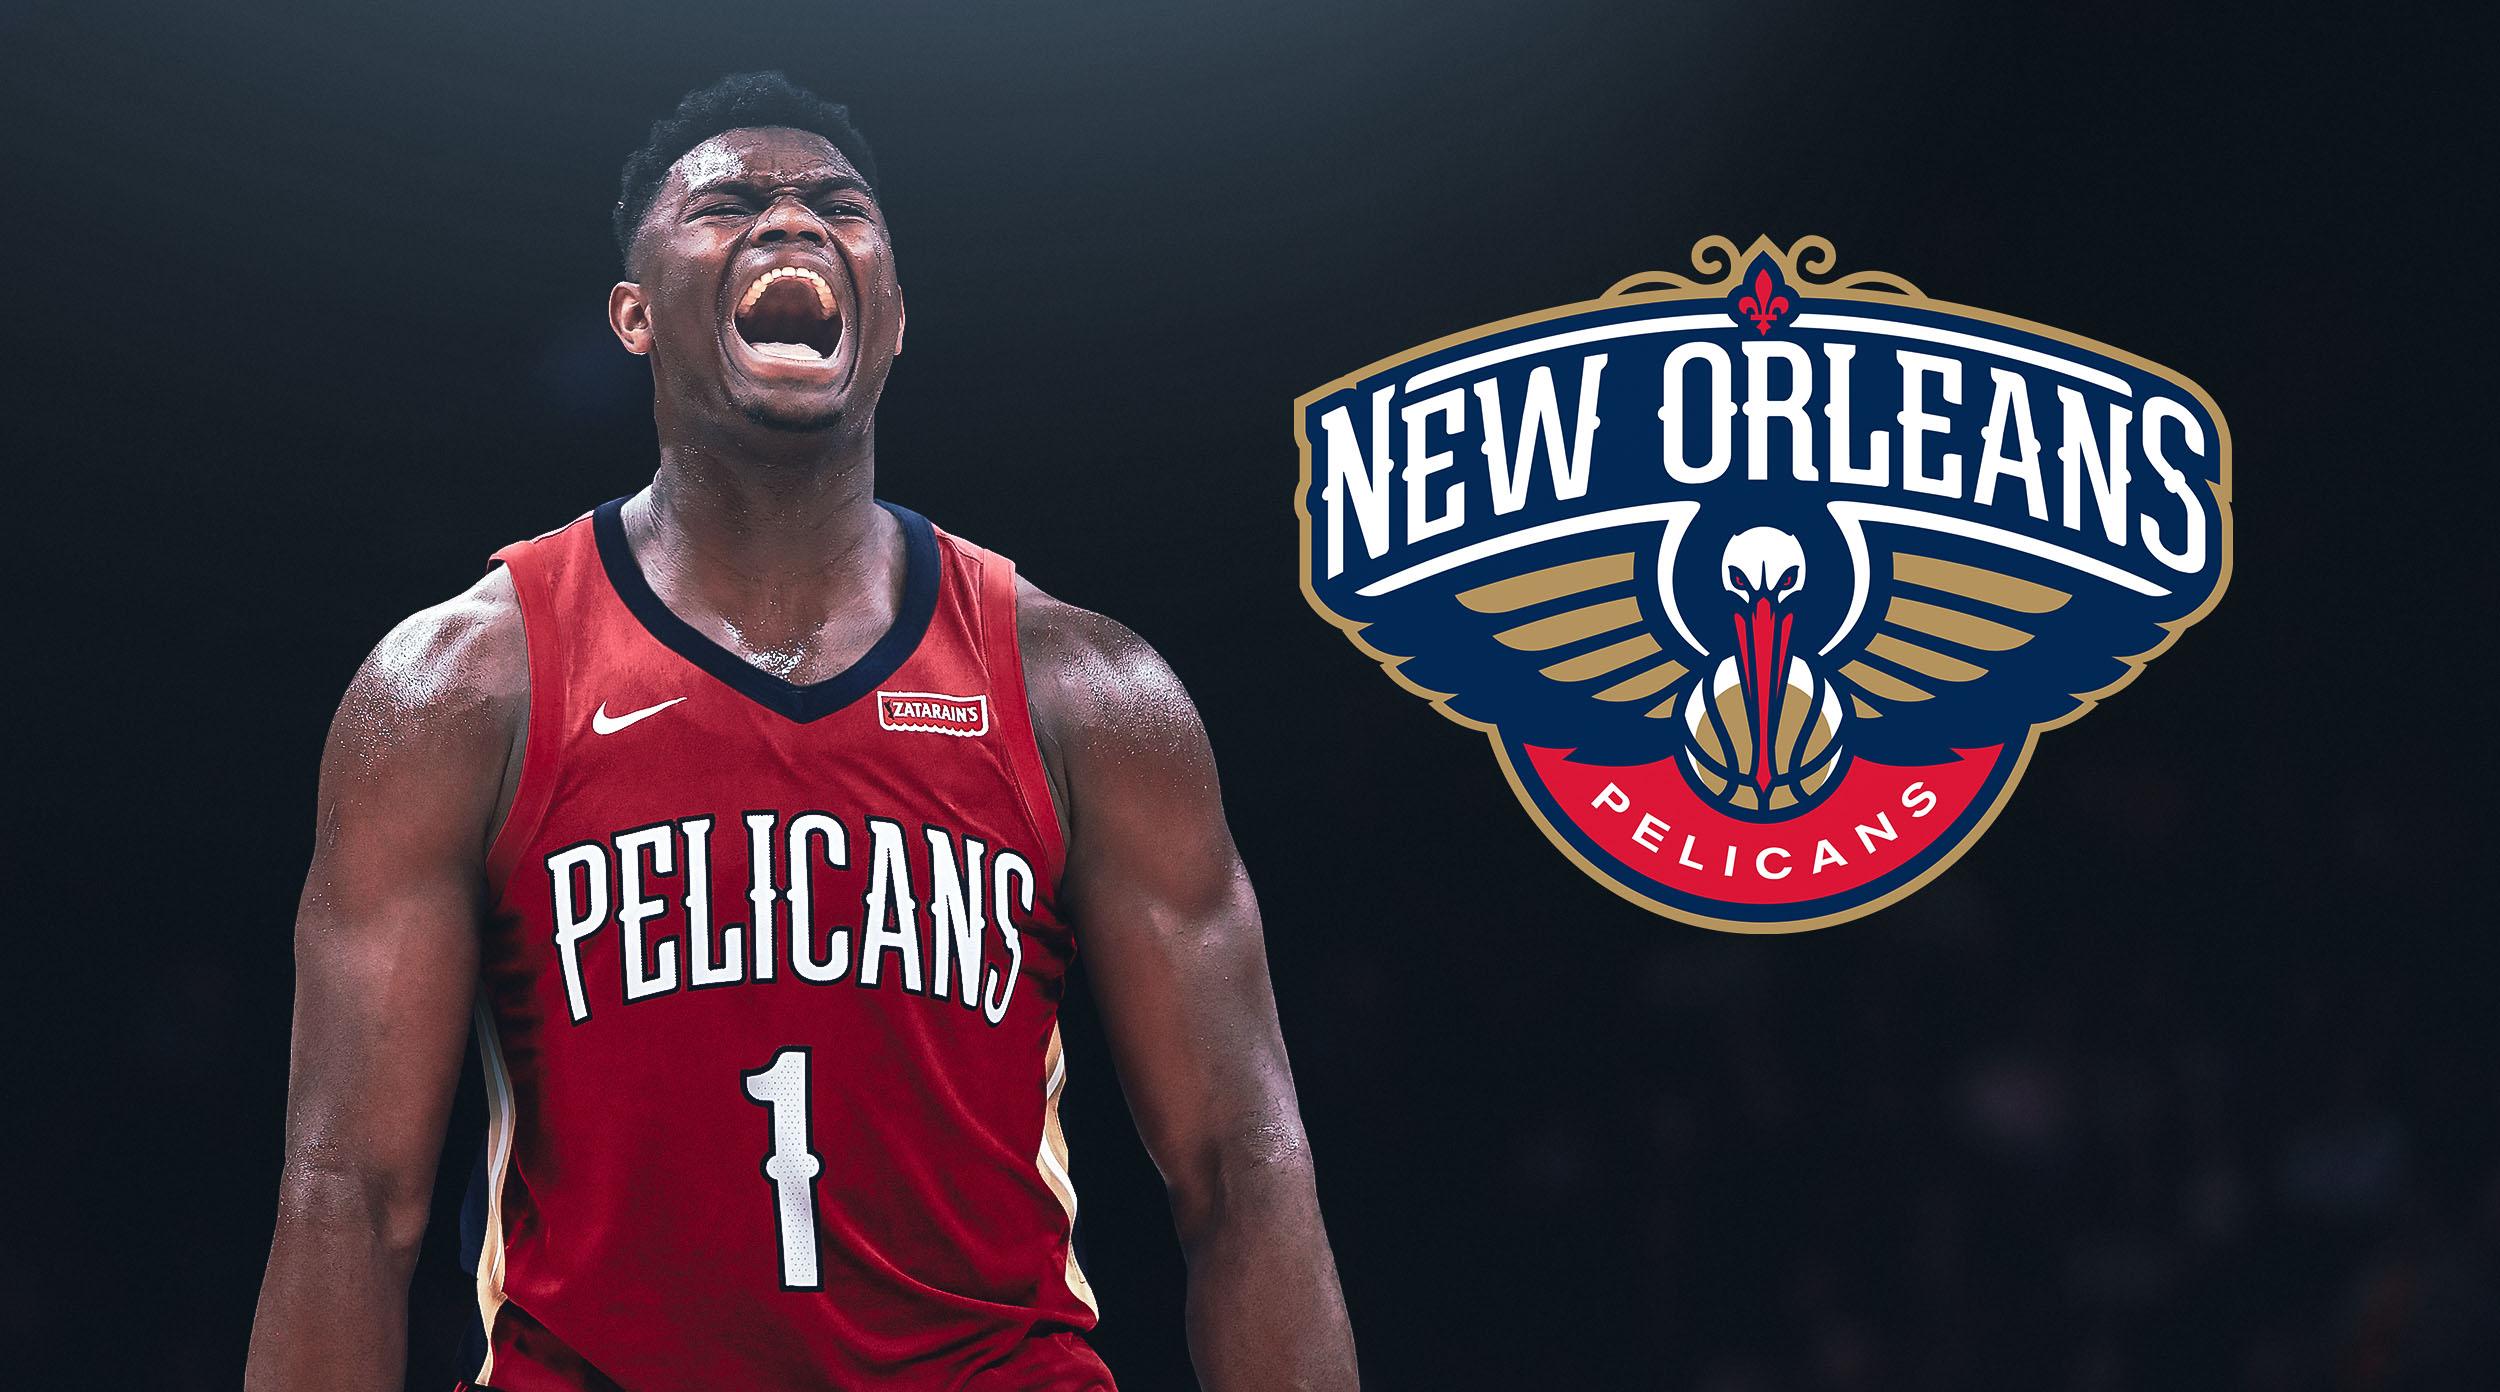 NBA Draft Lottery: Pelicans land shot at Zion Williamson